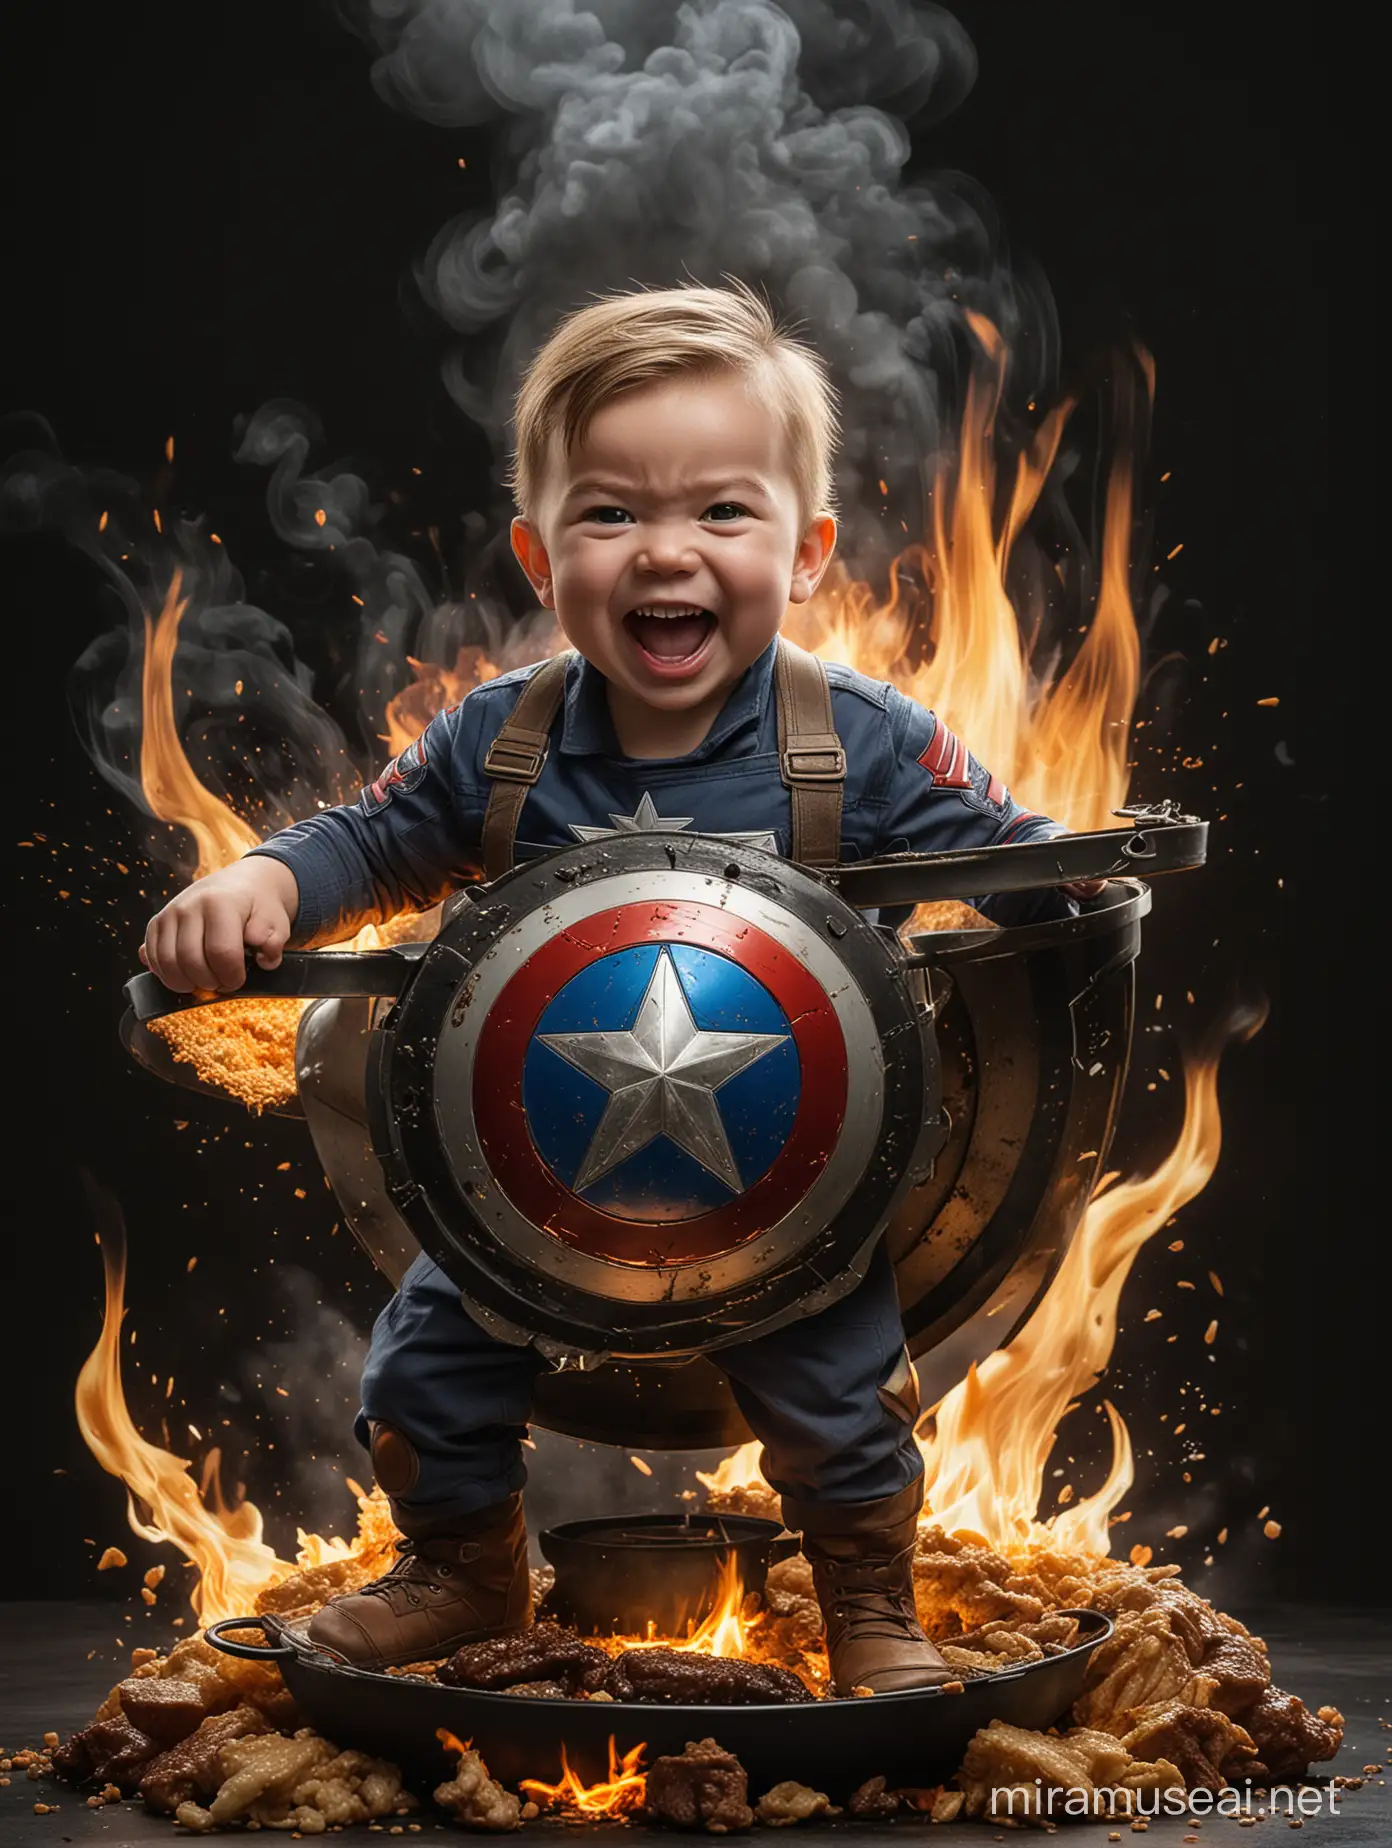 Provide an image of Captain America baby form caricature memes cooking fried rice using captain america's shield as a substitute for a wok. The fried rice is depicted flying off the Captain America's shield as a substitute for a wok, with flames blazing underneath it. Captain America is shown cooking at an interesting perspective angle, with his cart and the Jakarta market for the background. He is smiling and laughing while cooking. Ensure a dramatic effect against a high-contrast black background for printing in DTF (Direct-to-Film) Printing or water-based color printing. The image and background should be centered and uncropped.